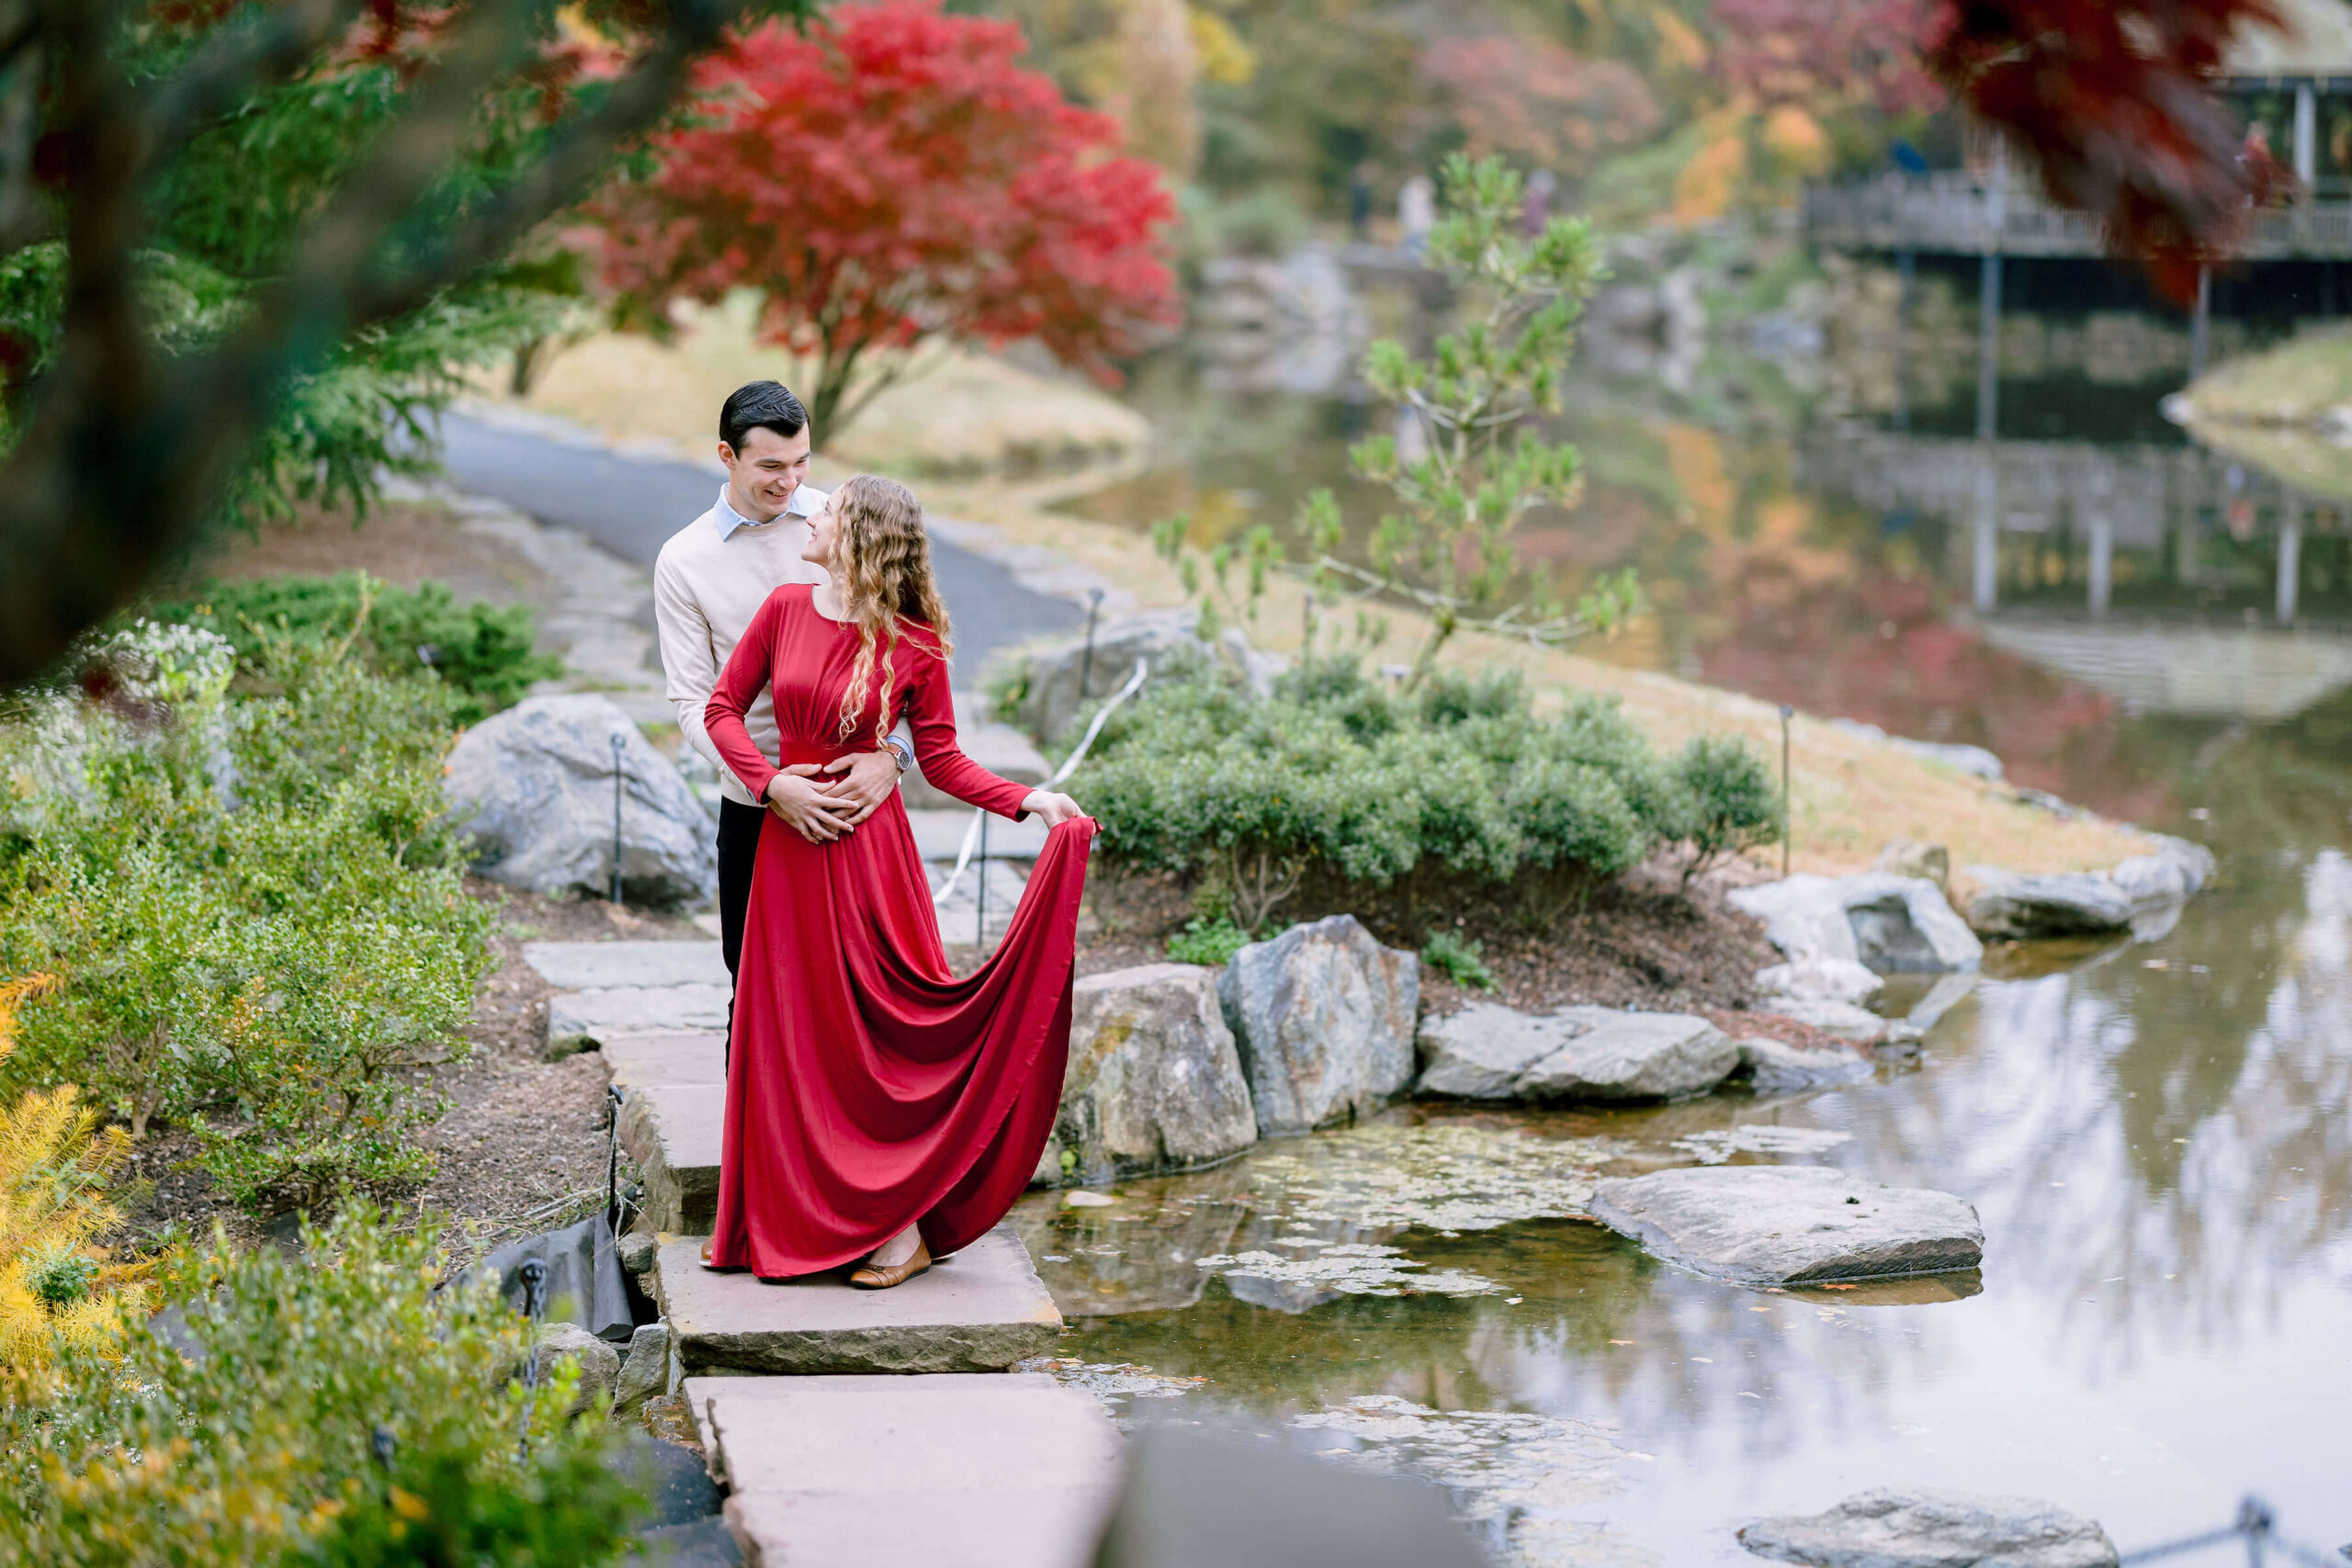 Romantic Engagement Sessions in Fall at Brookside Gardens, Maryland - Couple in Red Wine Dress and Beige Sweater Poses